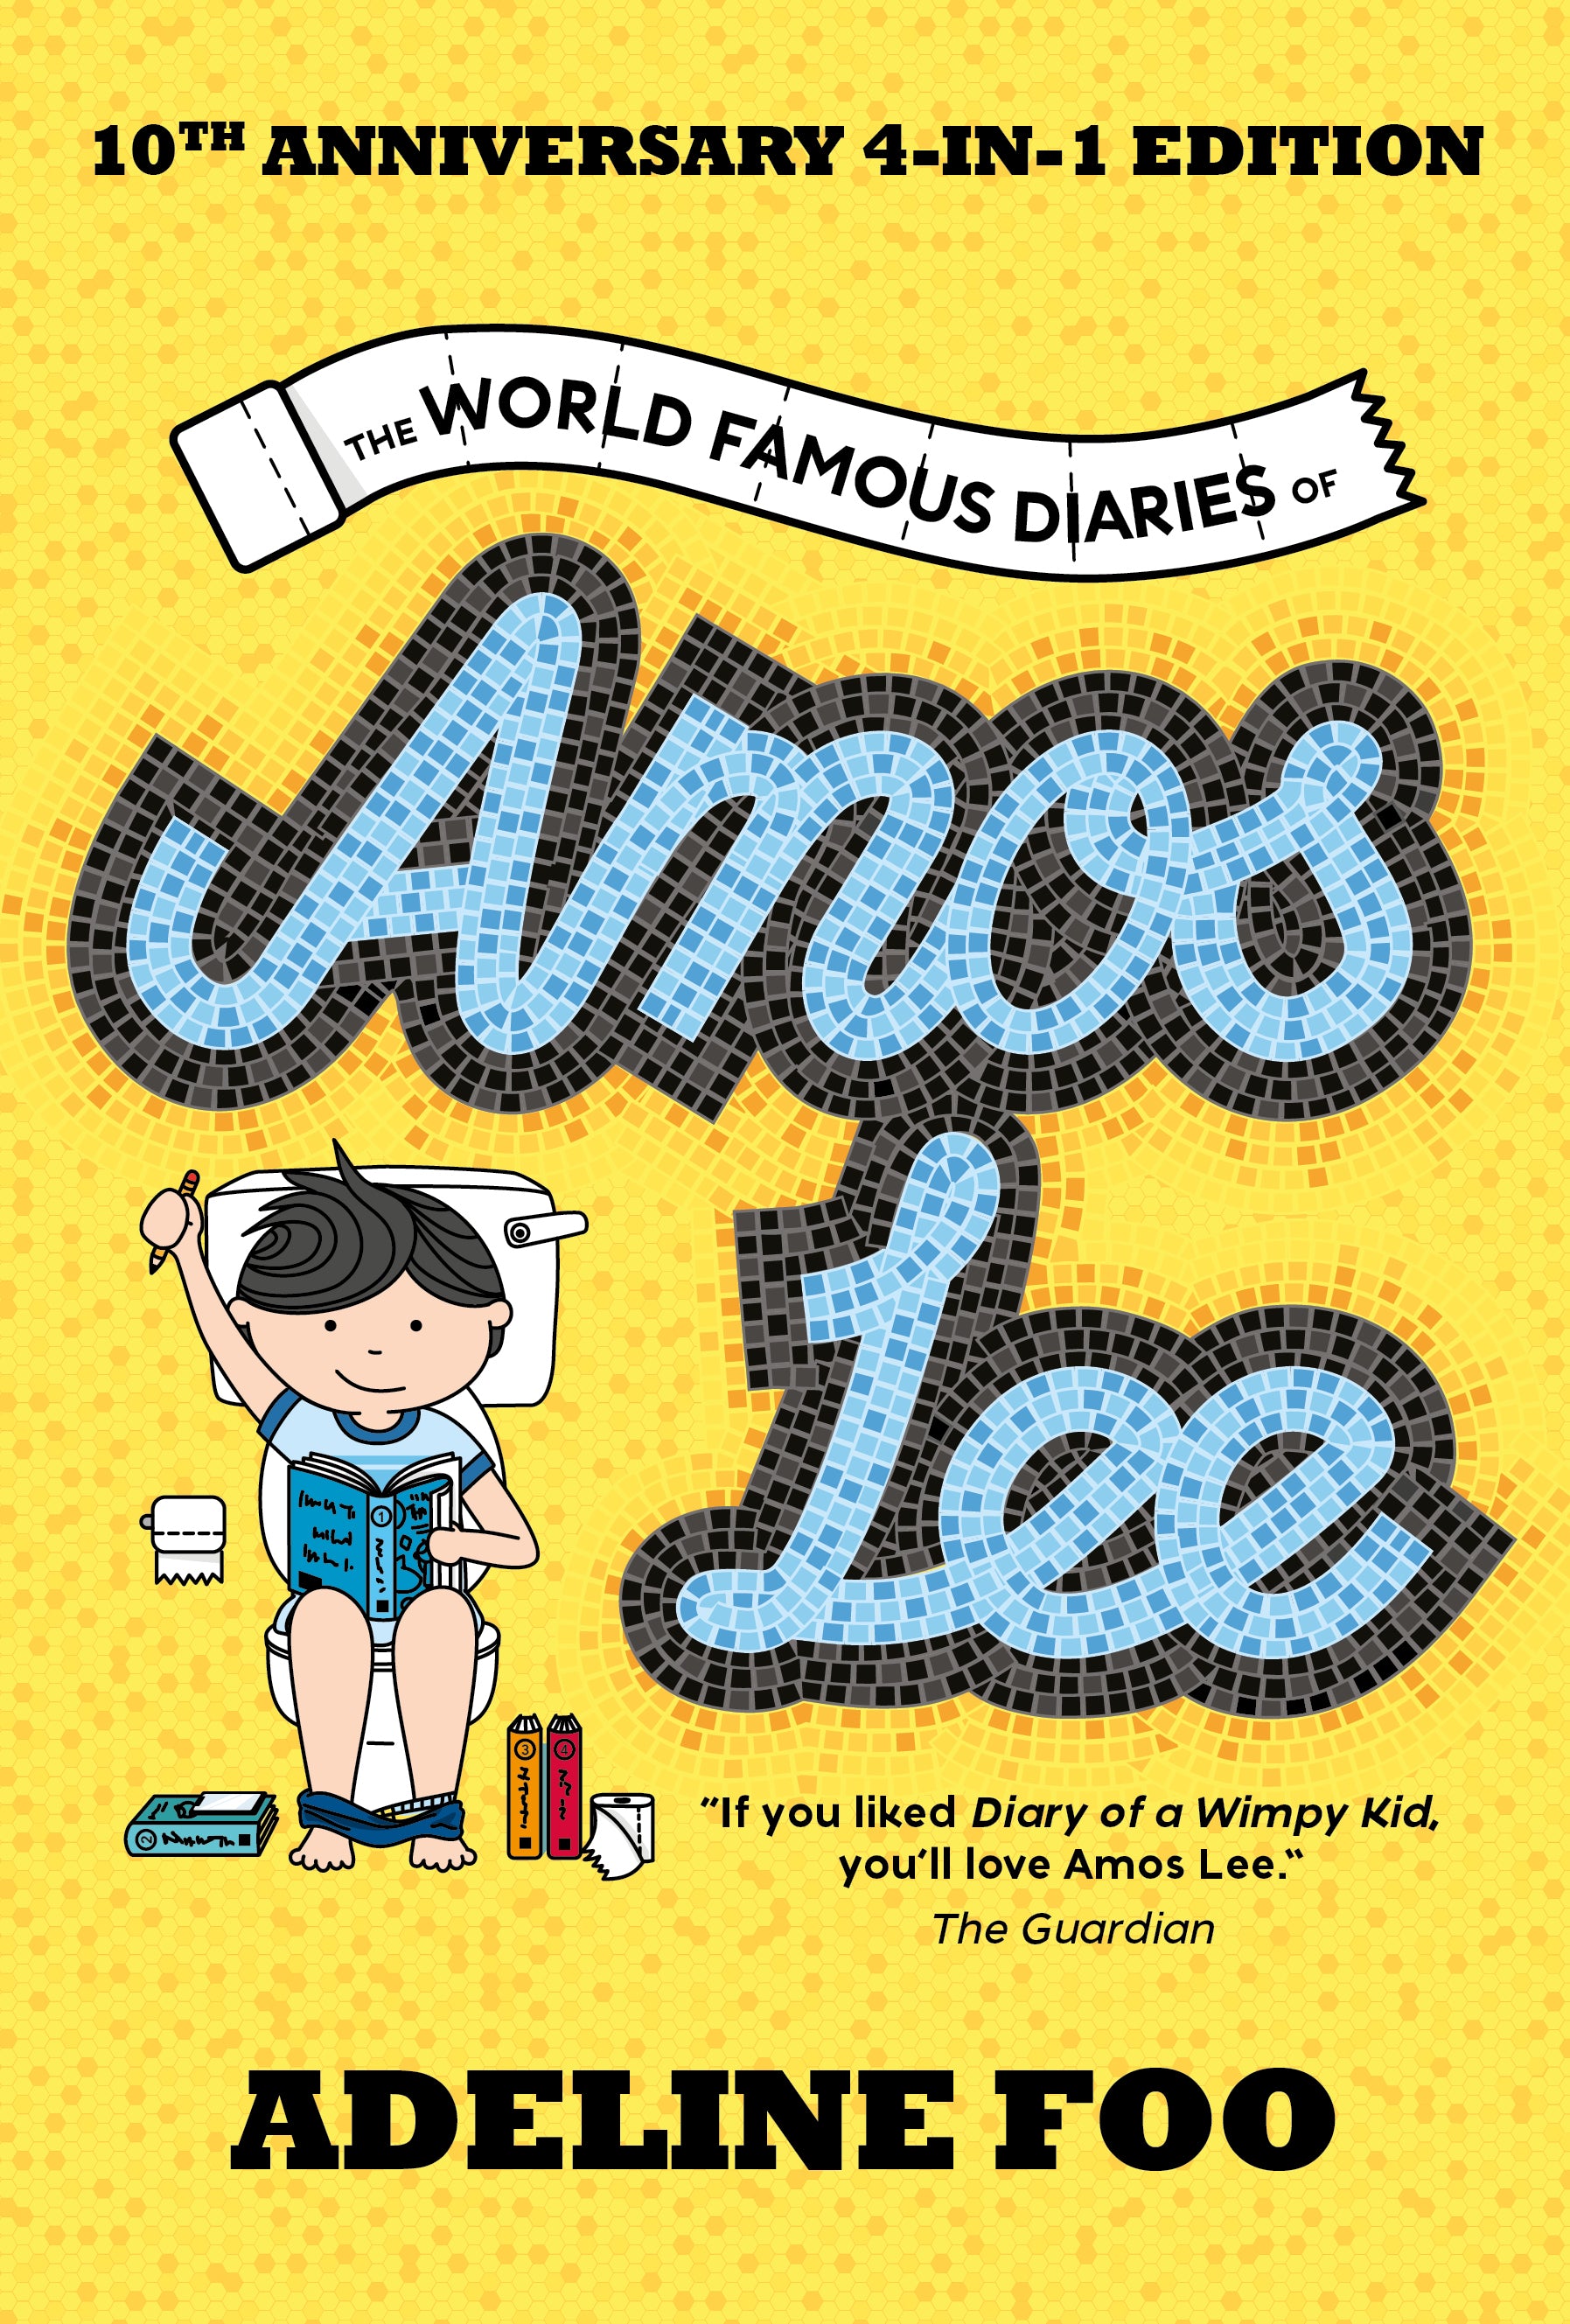 The World Famous Diaries of Amos Lee: 10th Anniversary 4-in-1 Edition